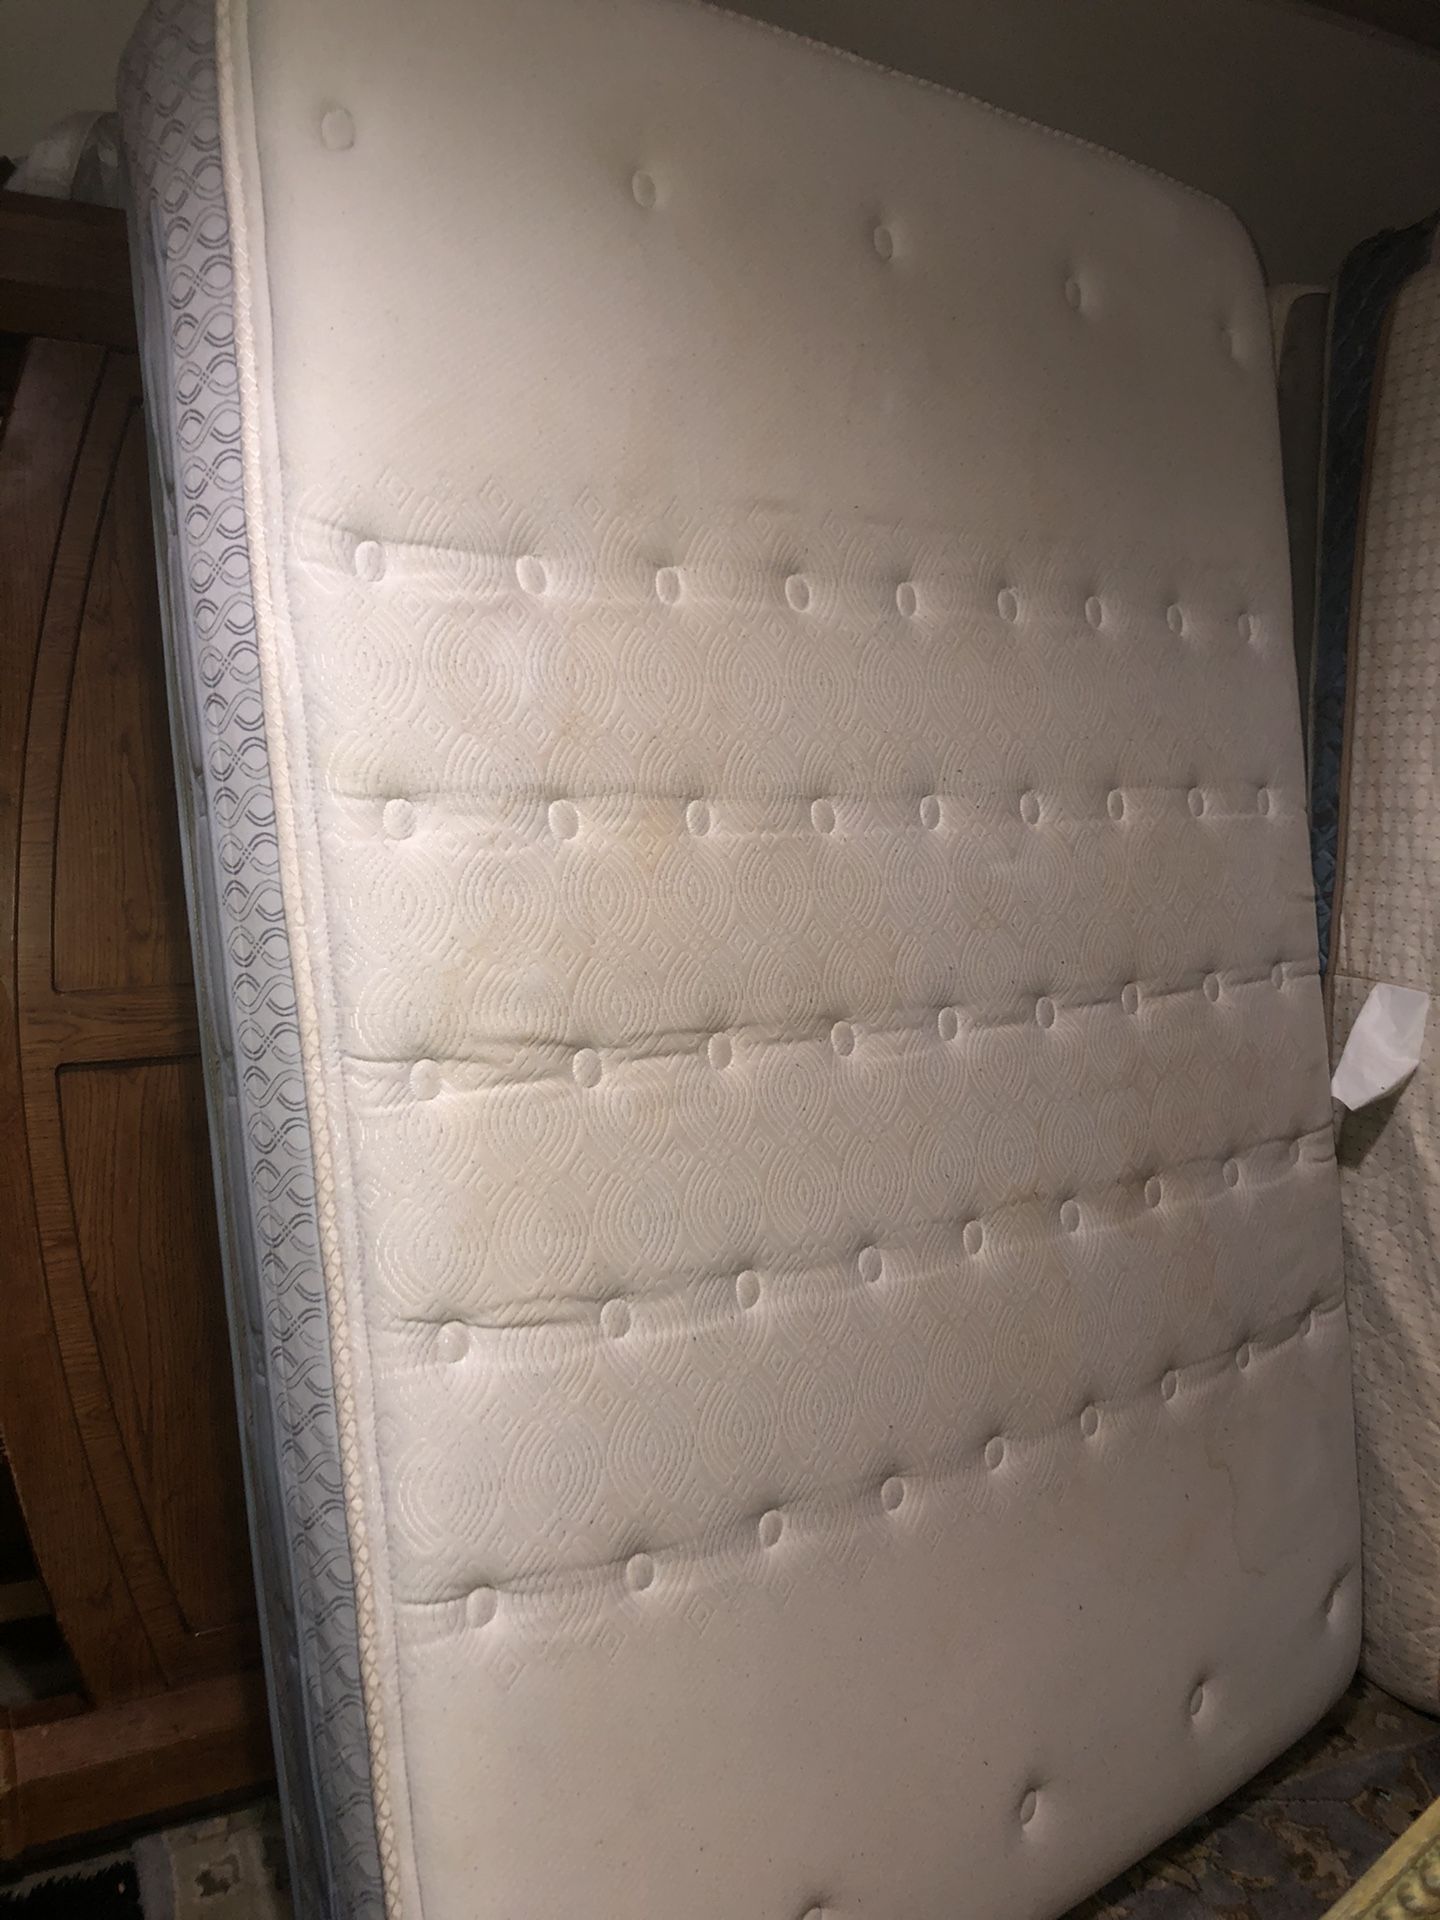 Full Sealy Posturepedic Belbrook Firm euro top mattress-in great shape-can deliver!